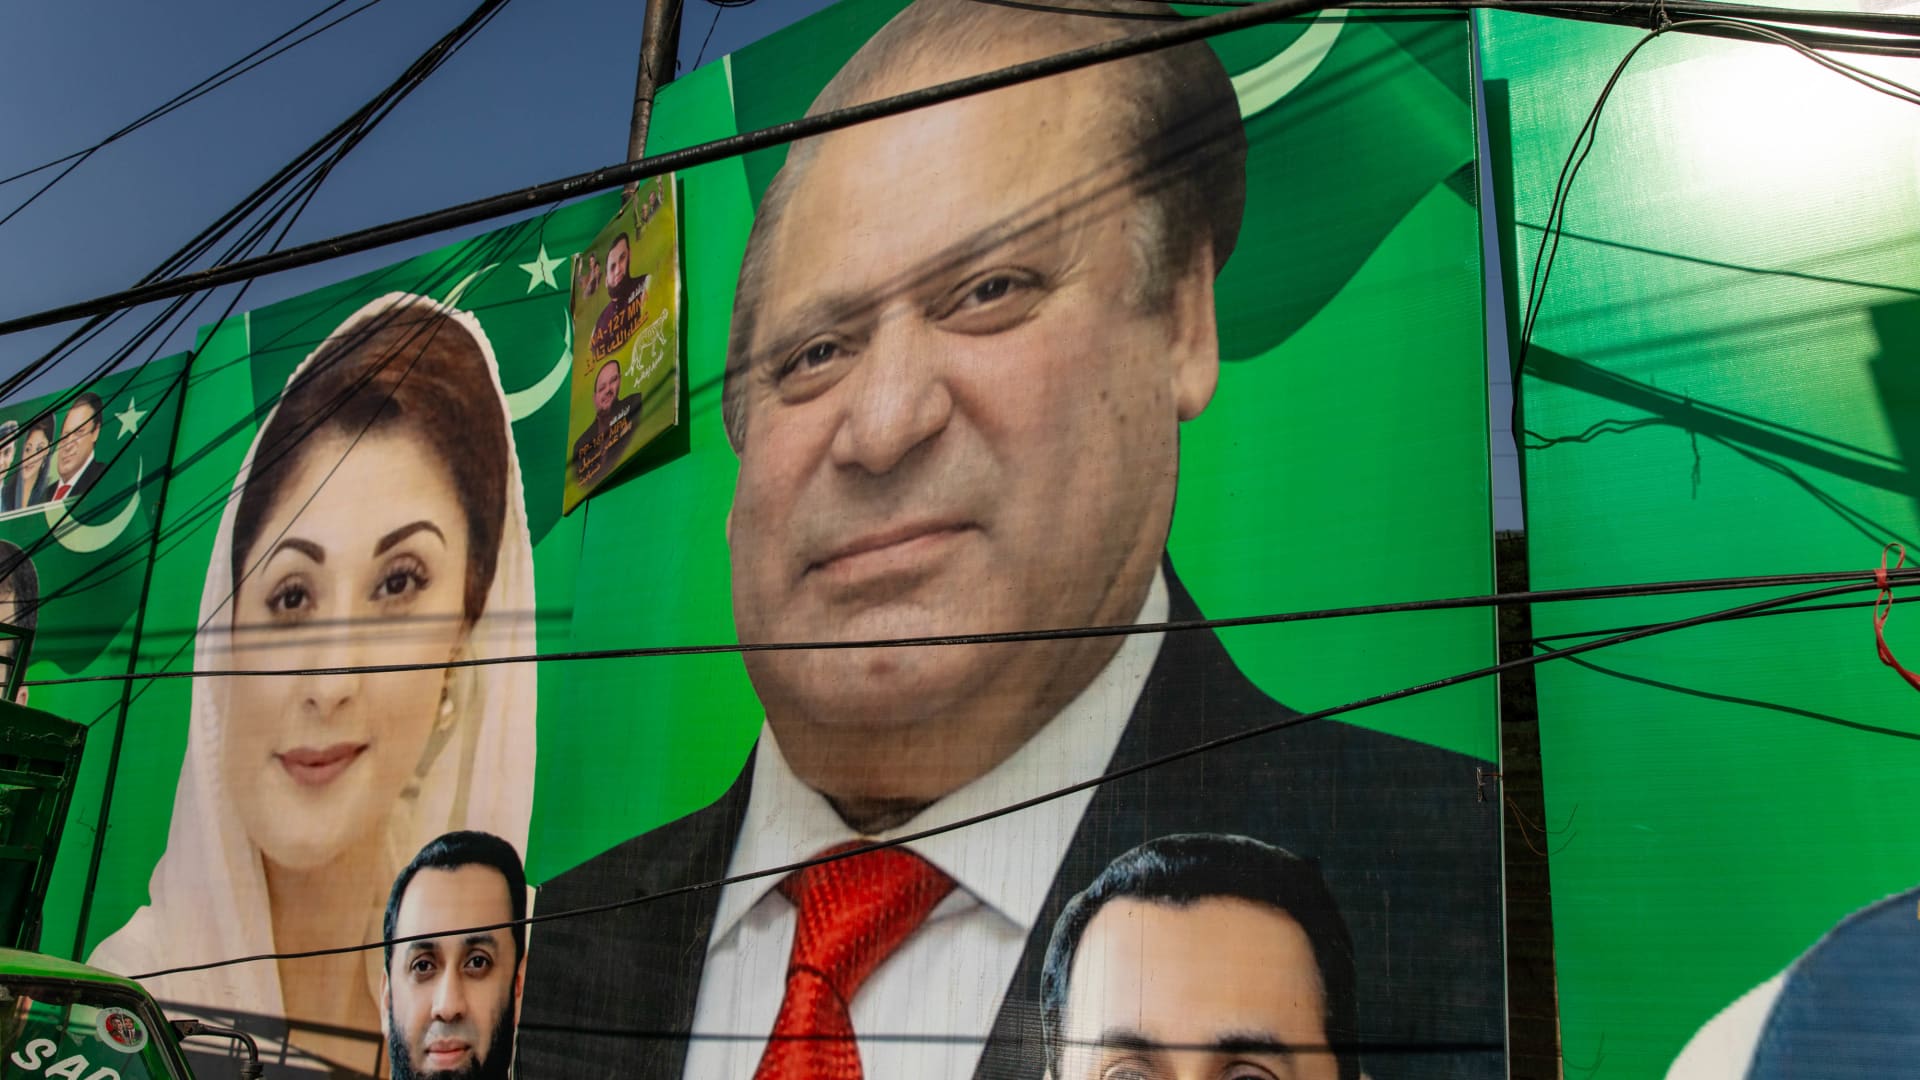 Nawaz Sharif claims victory amid vote rigging claims